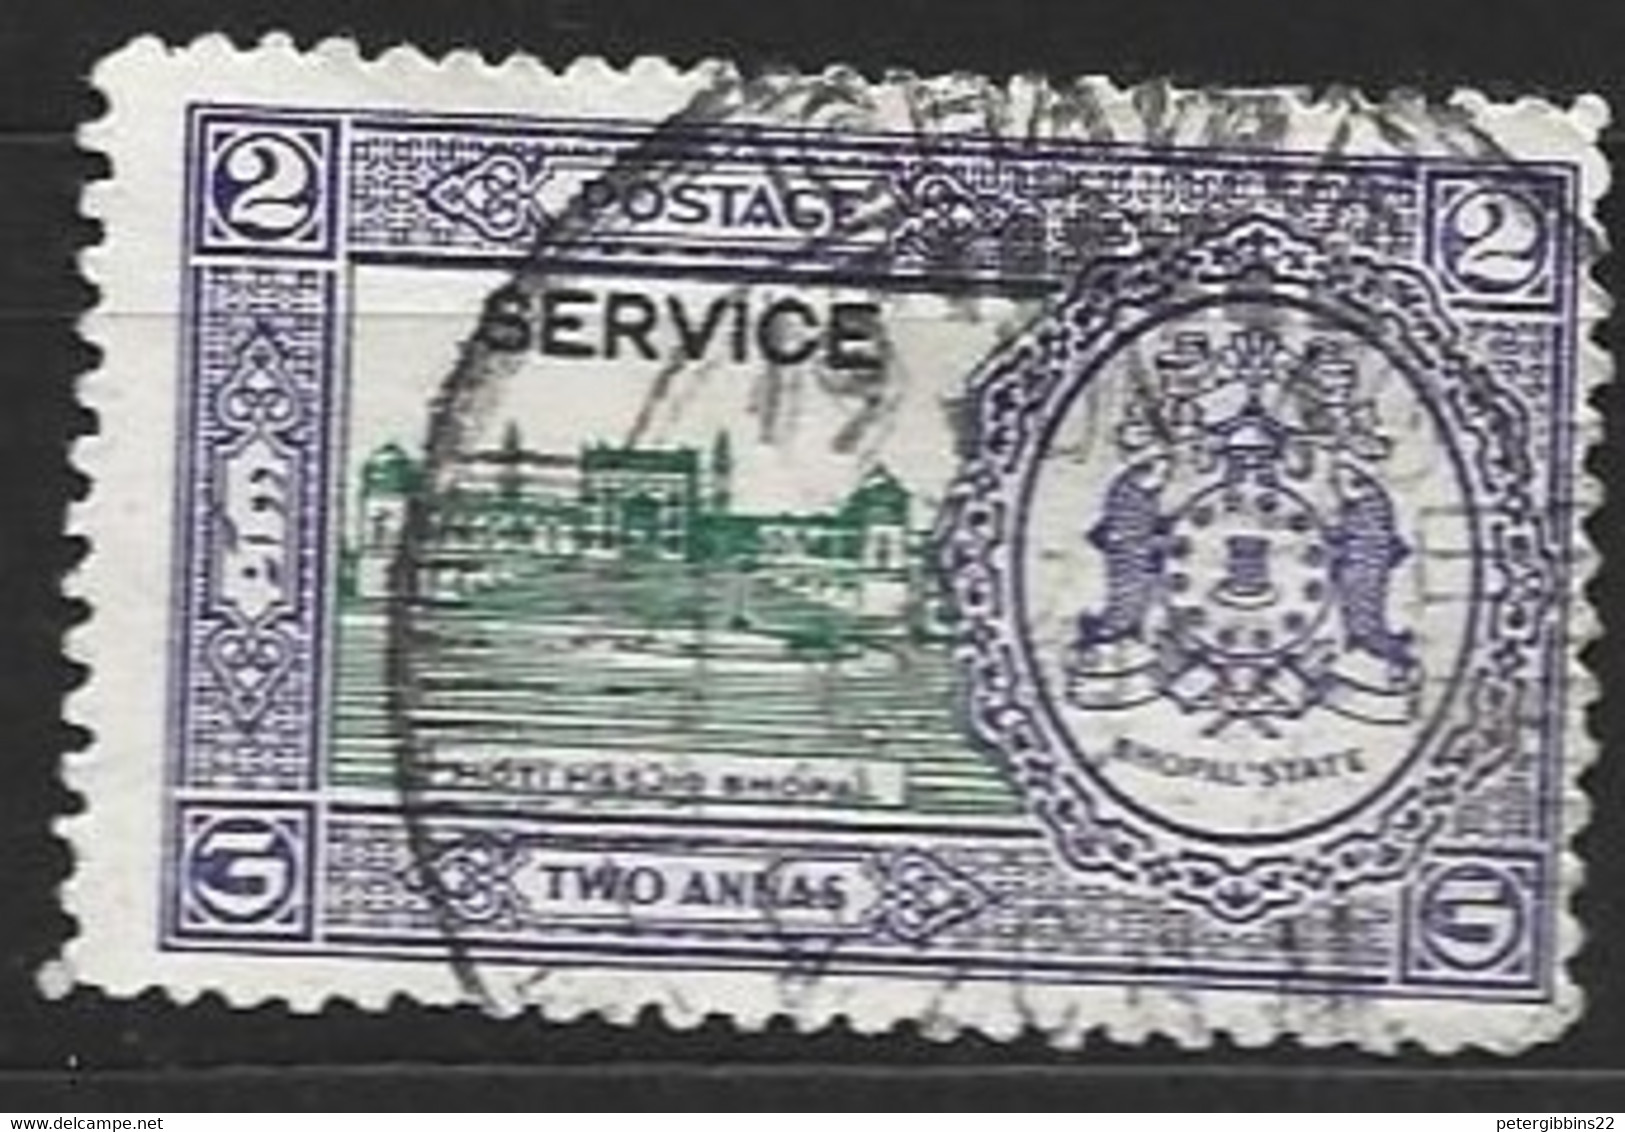 India  Bhopal  1936  SG  0338  2a  Services  Fine Used - Bhopal